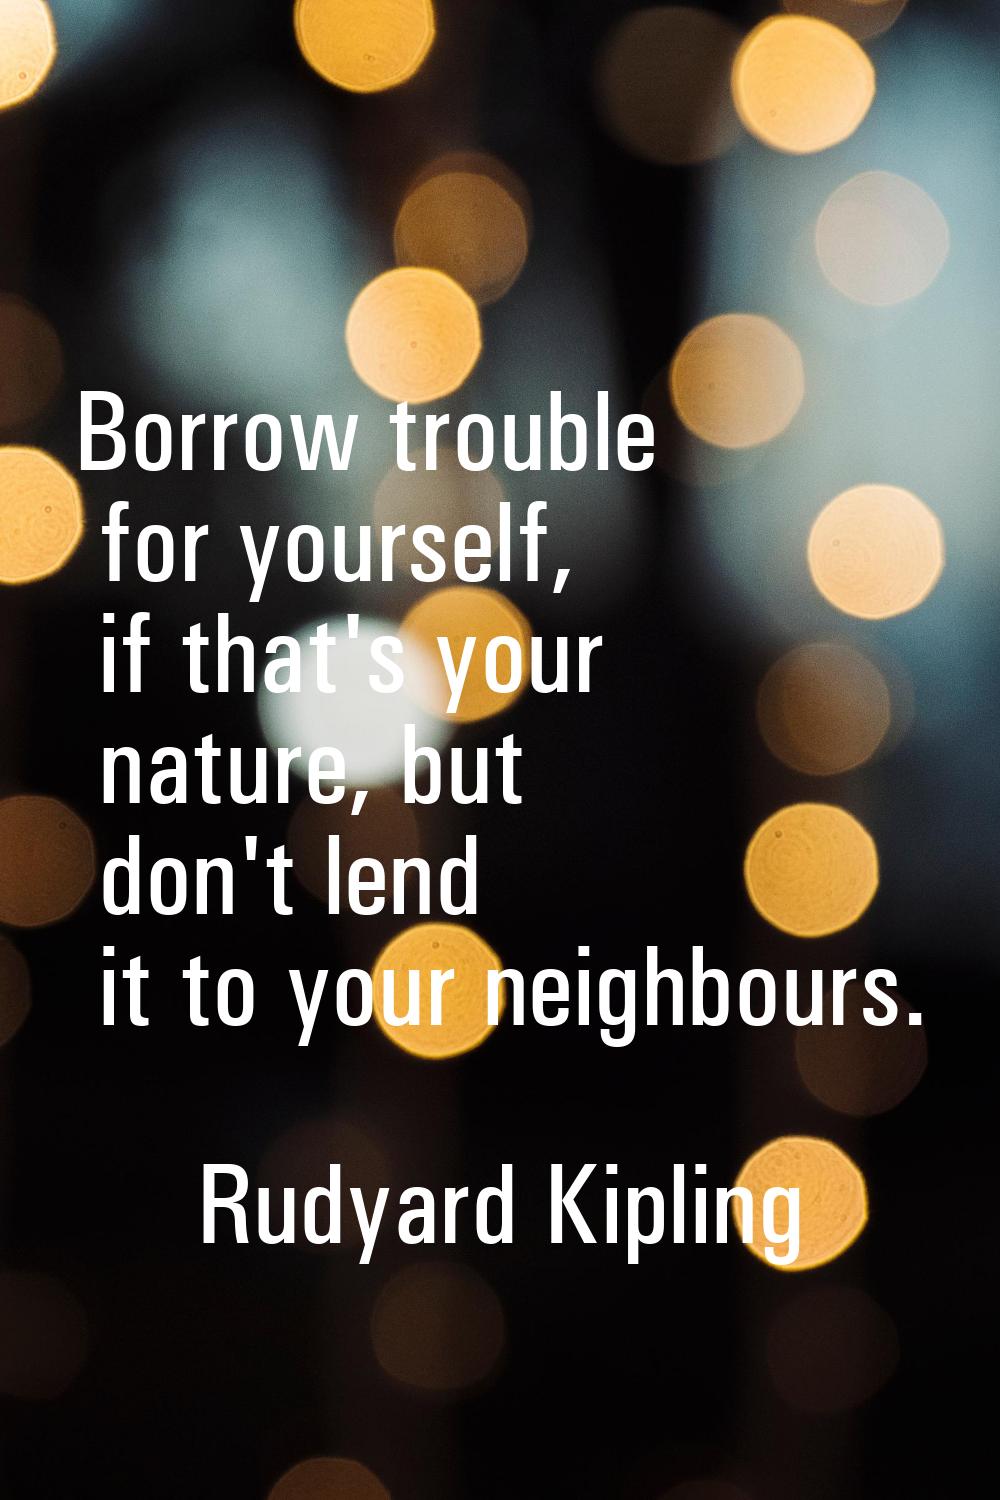 Borrow trouble for yourself, if that's your nature, but don't lend it to your neighbours.